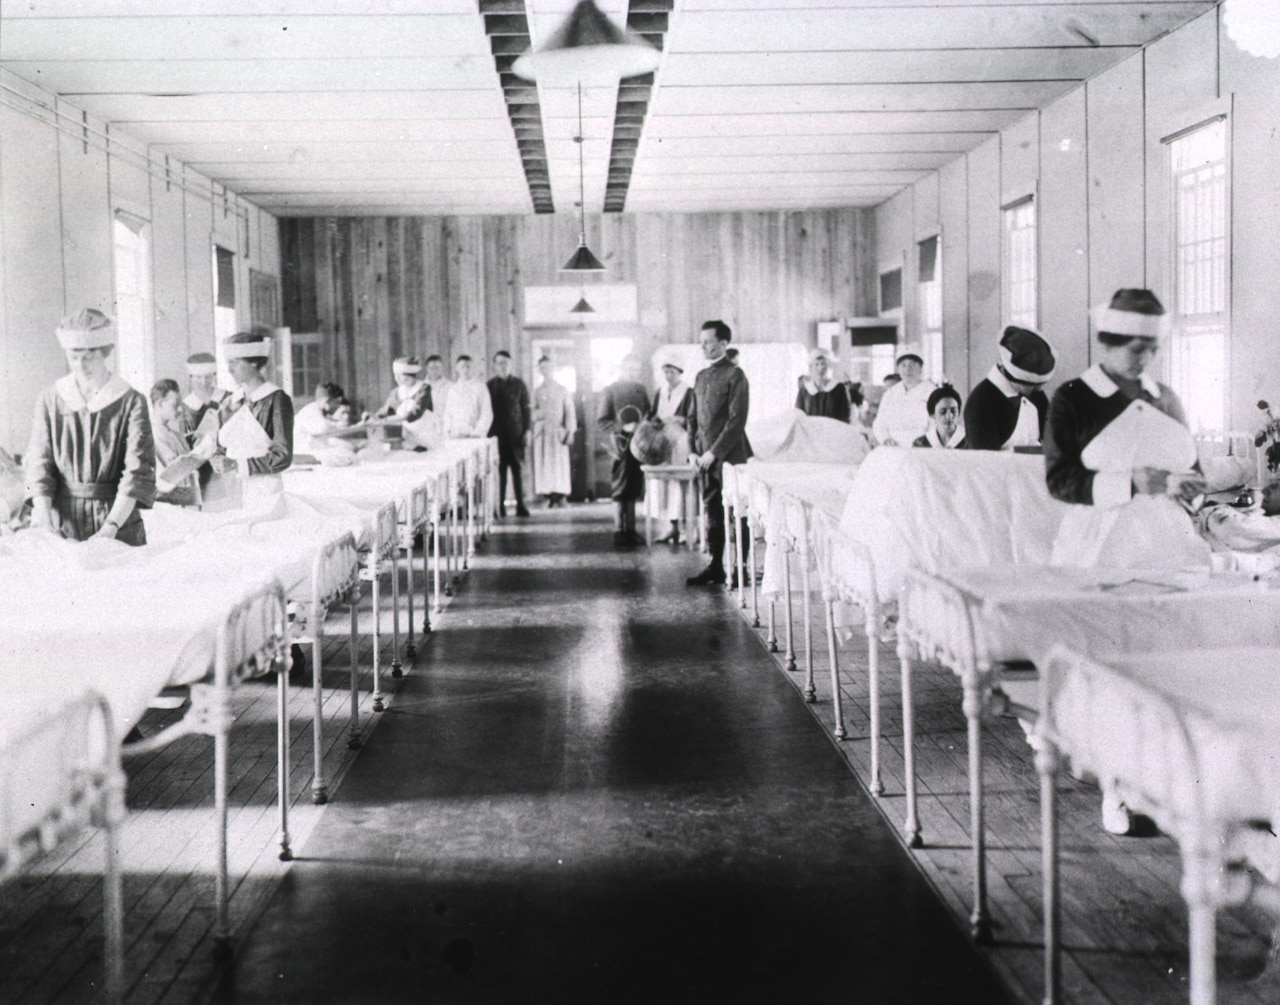 Several hospital beds are lined up in a room. Nurses tend to some of the patients in those beds.